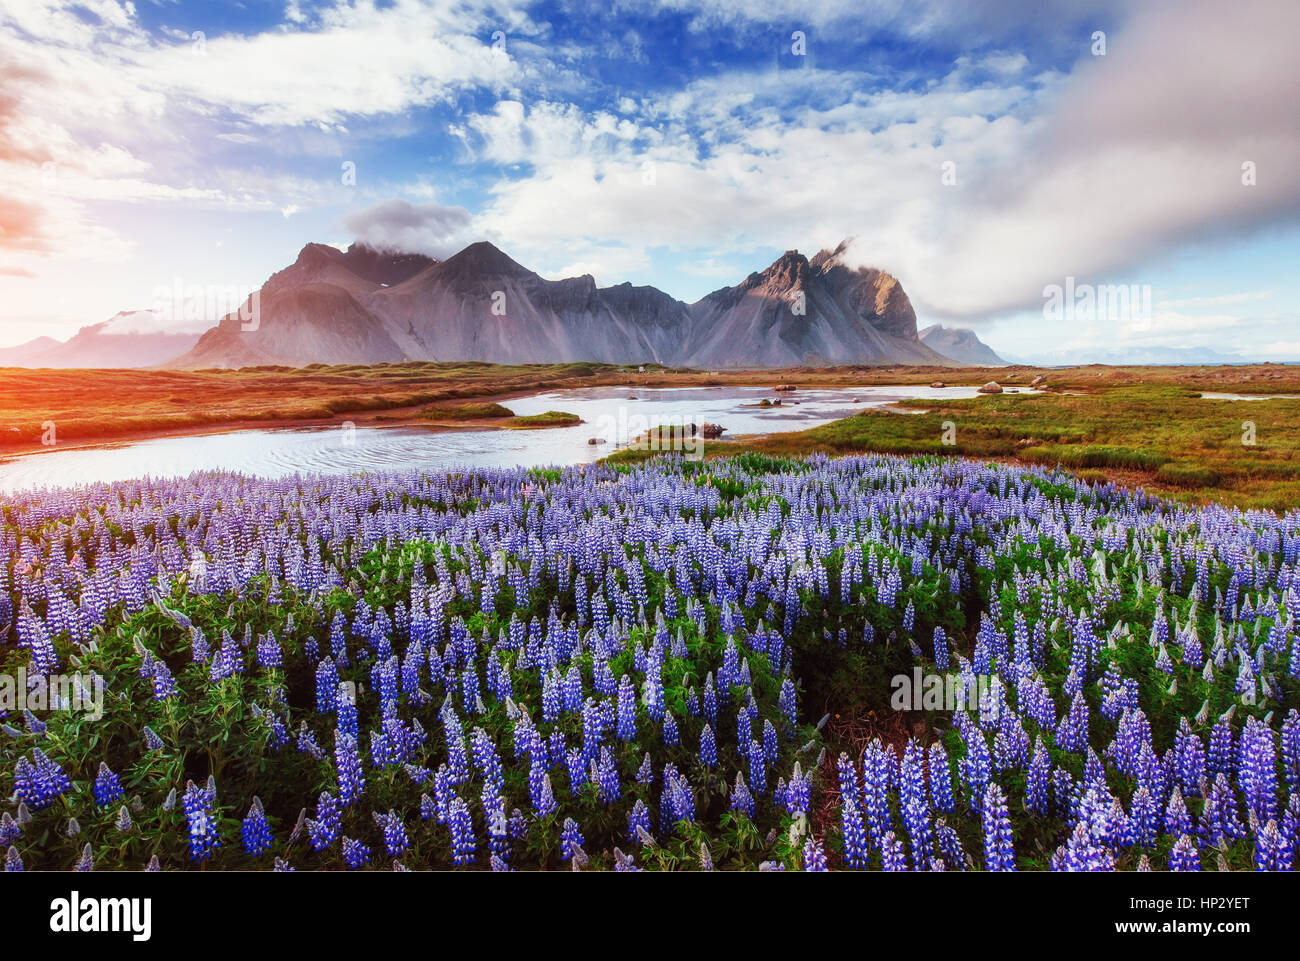 The picturesque landscapes forests and mountains of Iceland. Stock Photo